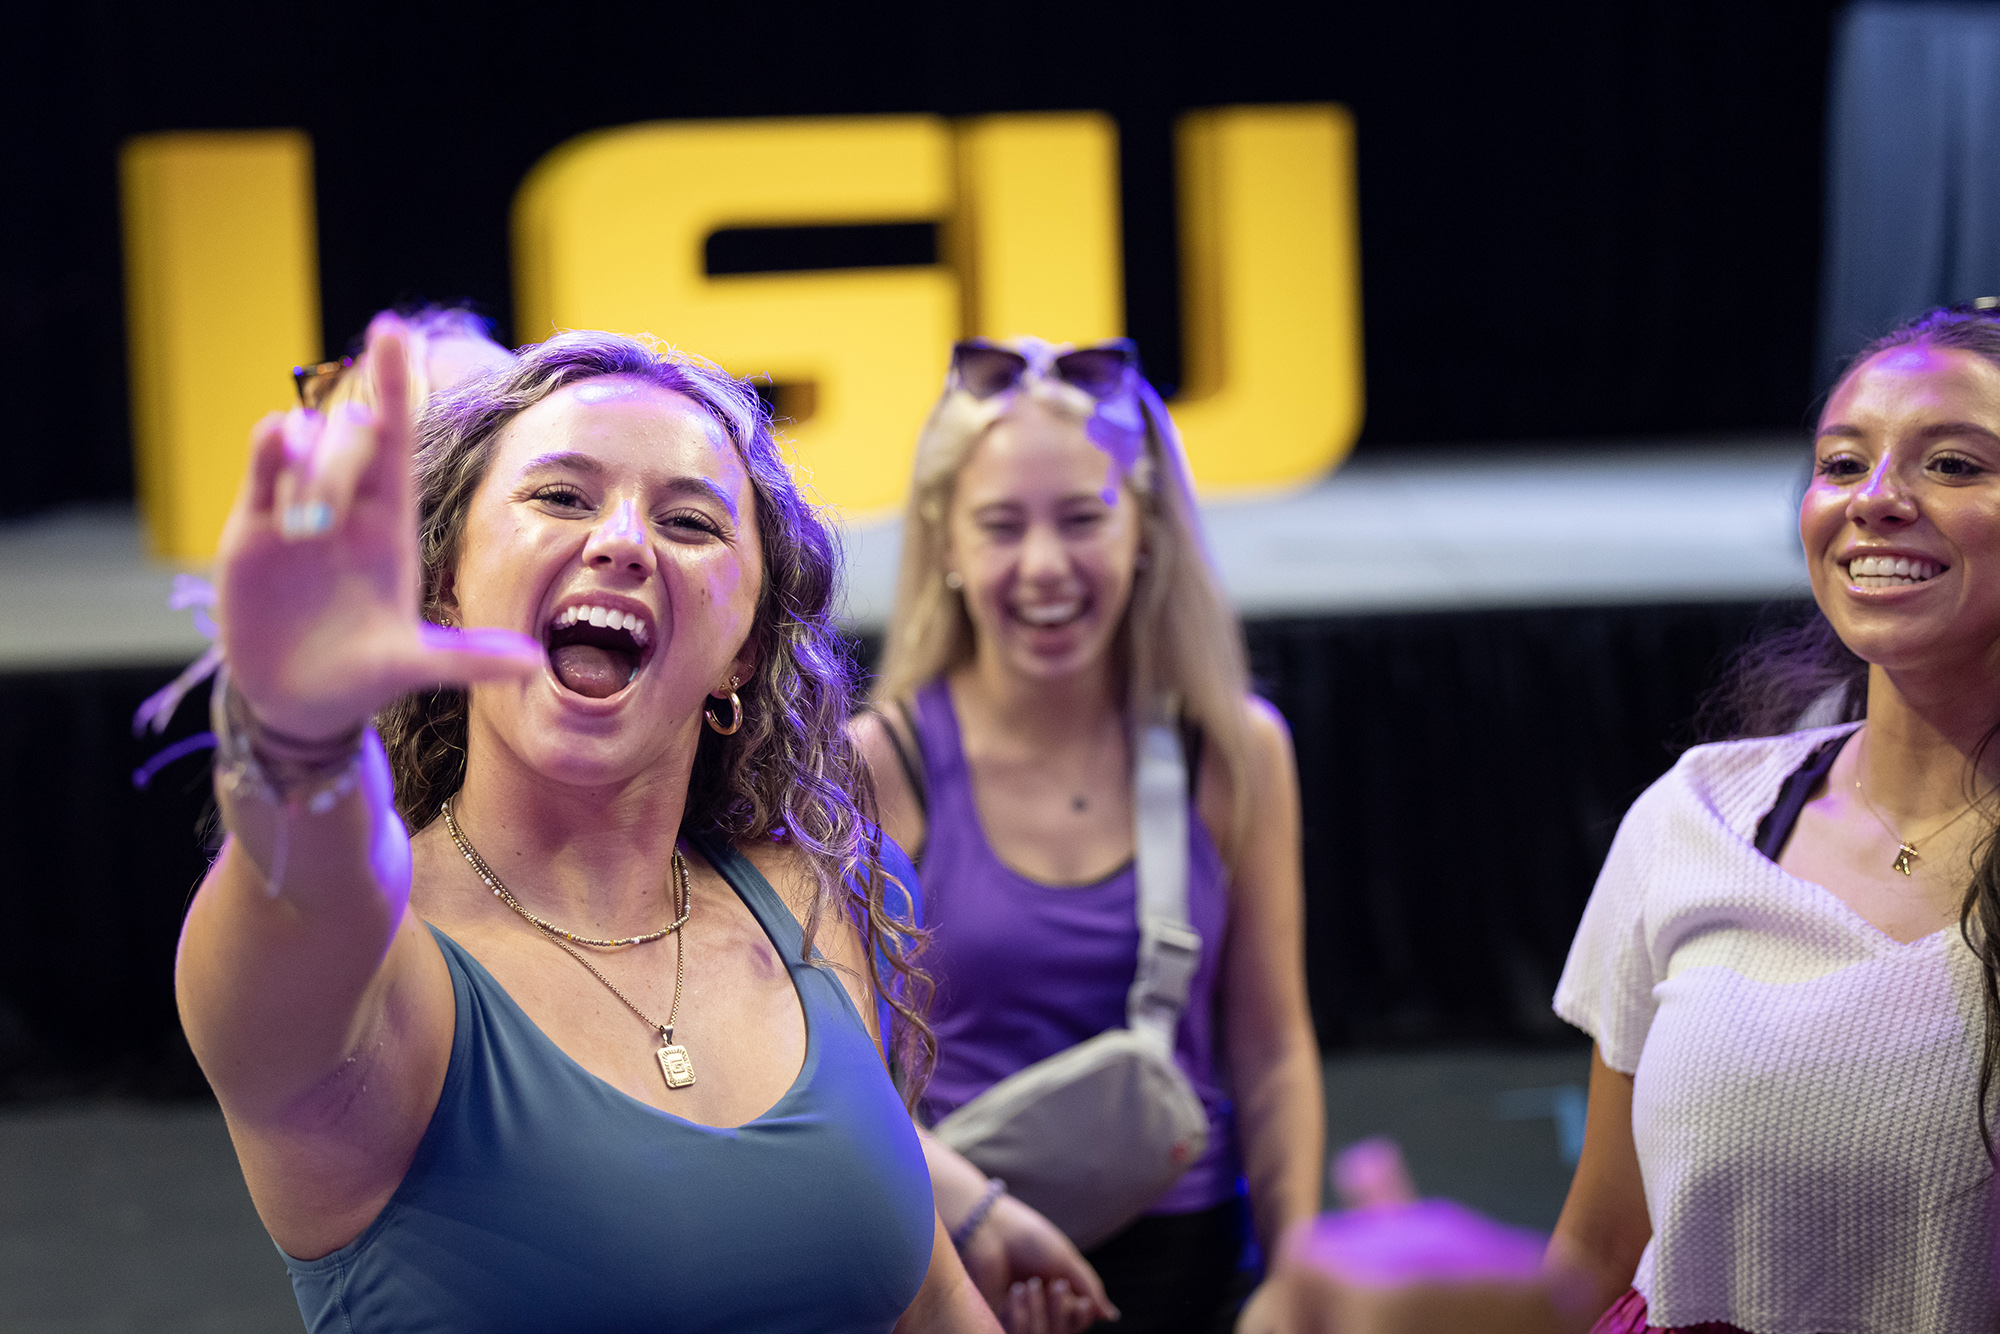 Students have a good time at LSU's Welcome Week convocation